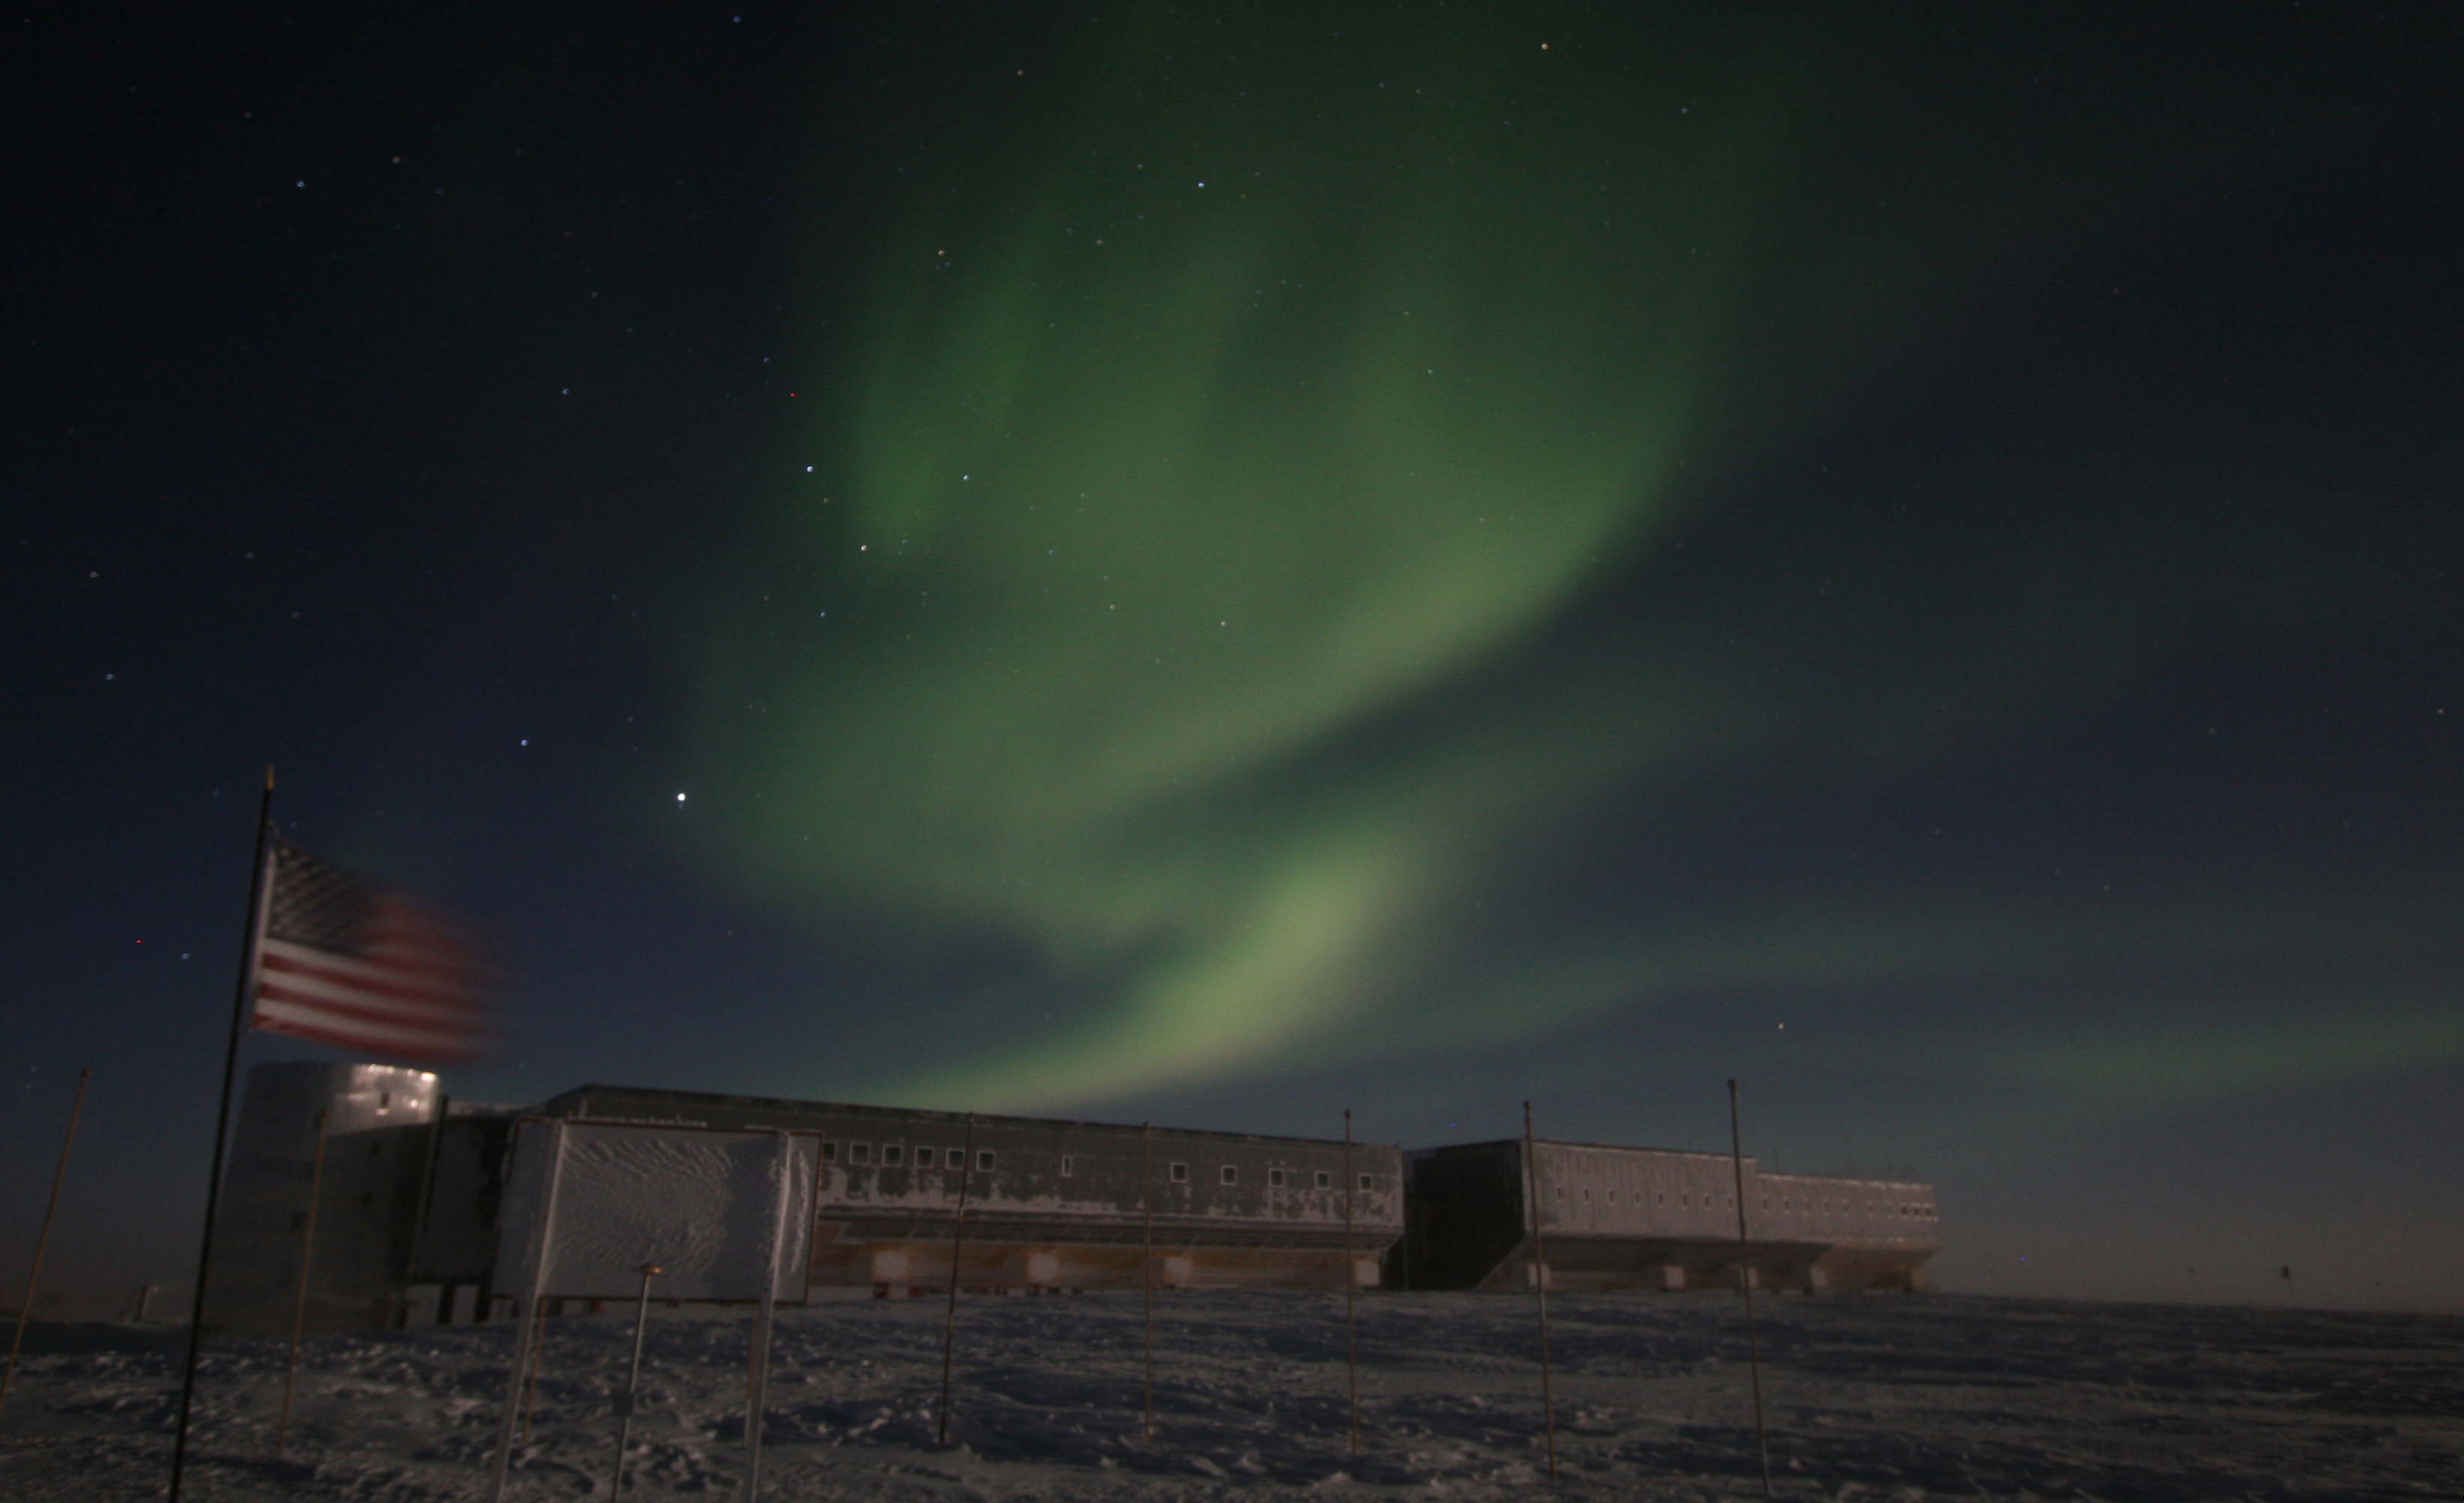 Aurora display in the night sky above the U.S. research station at the South Pole.